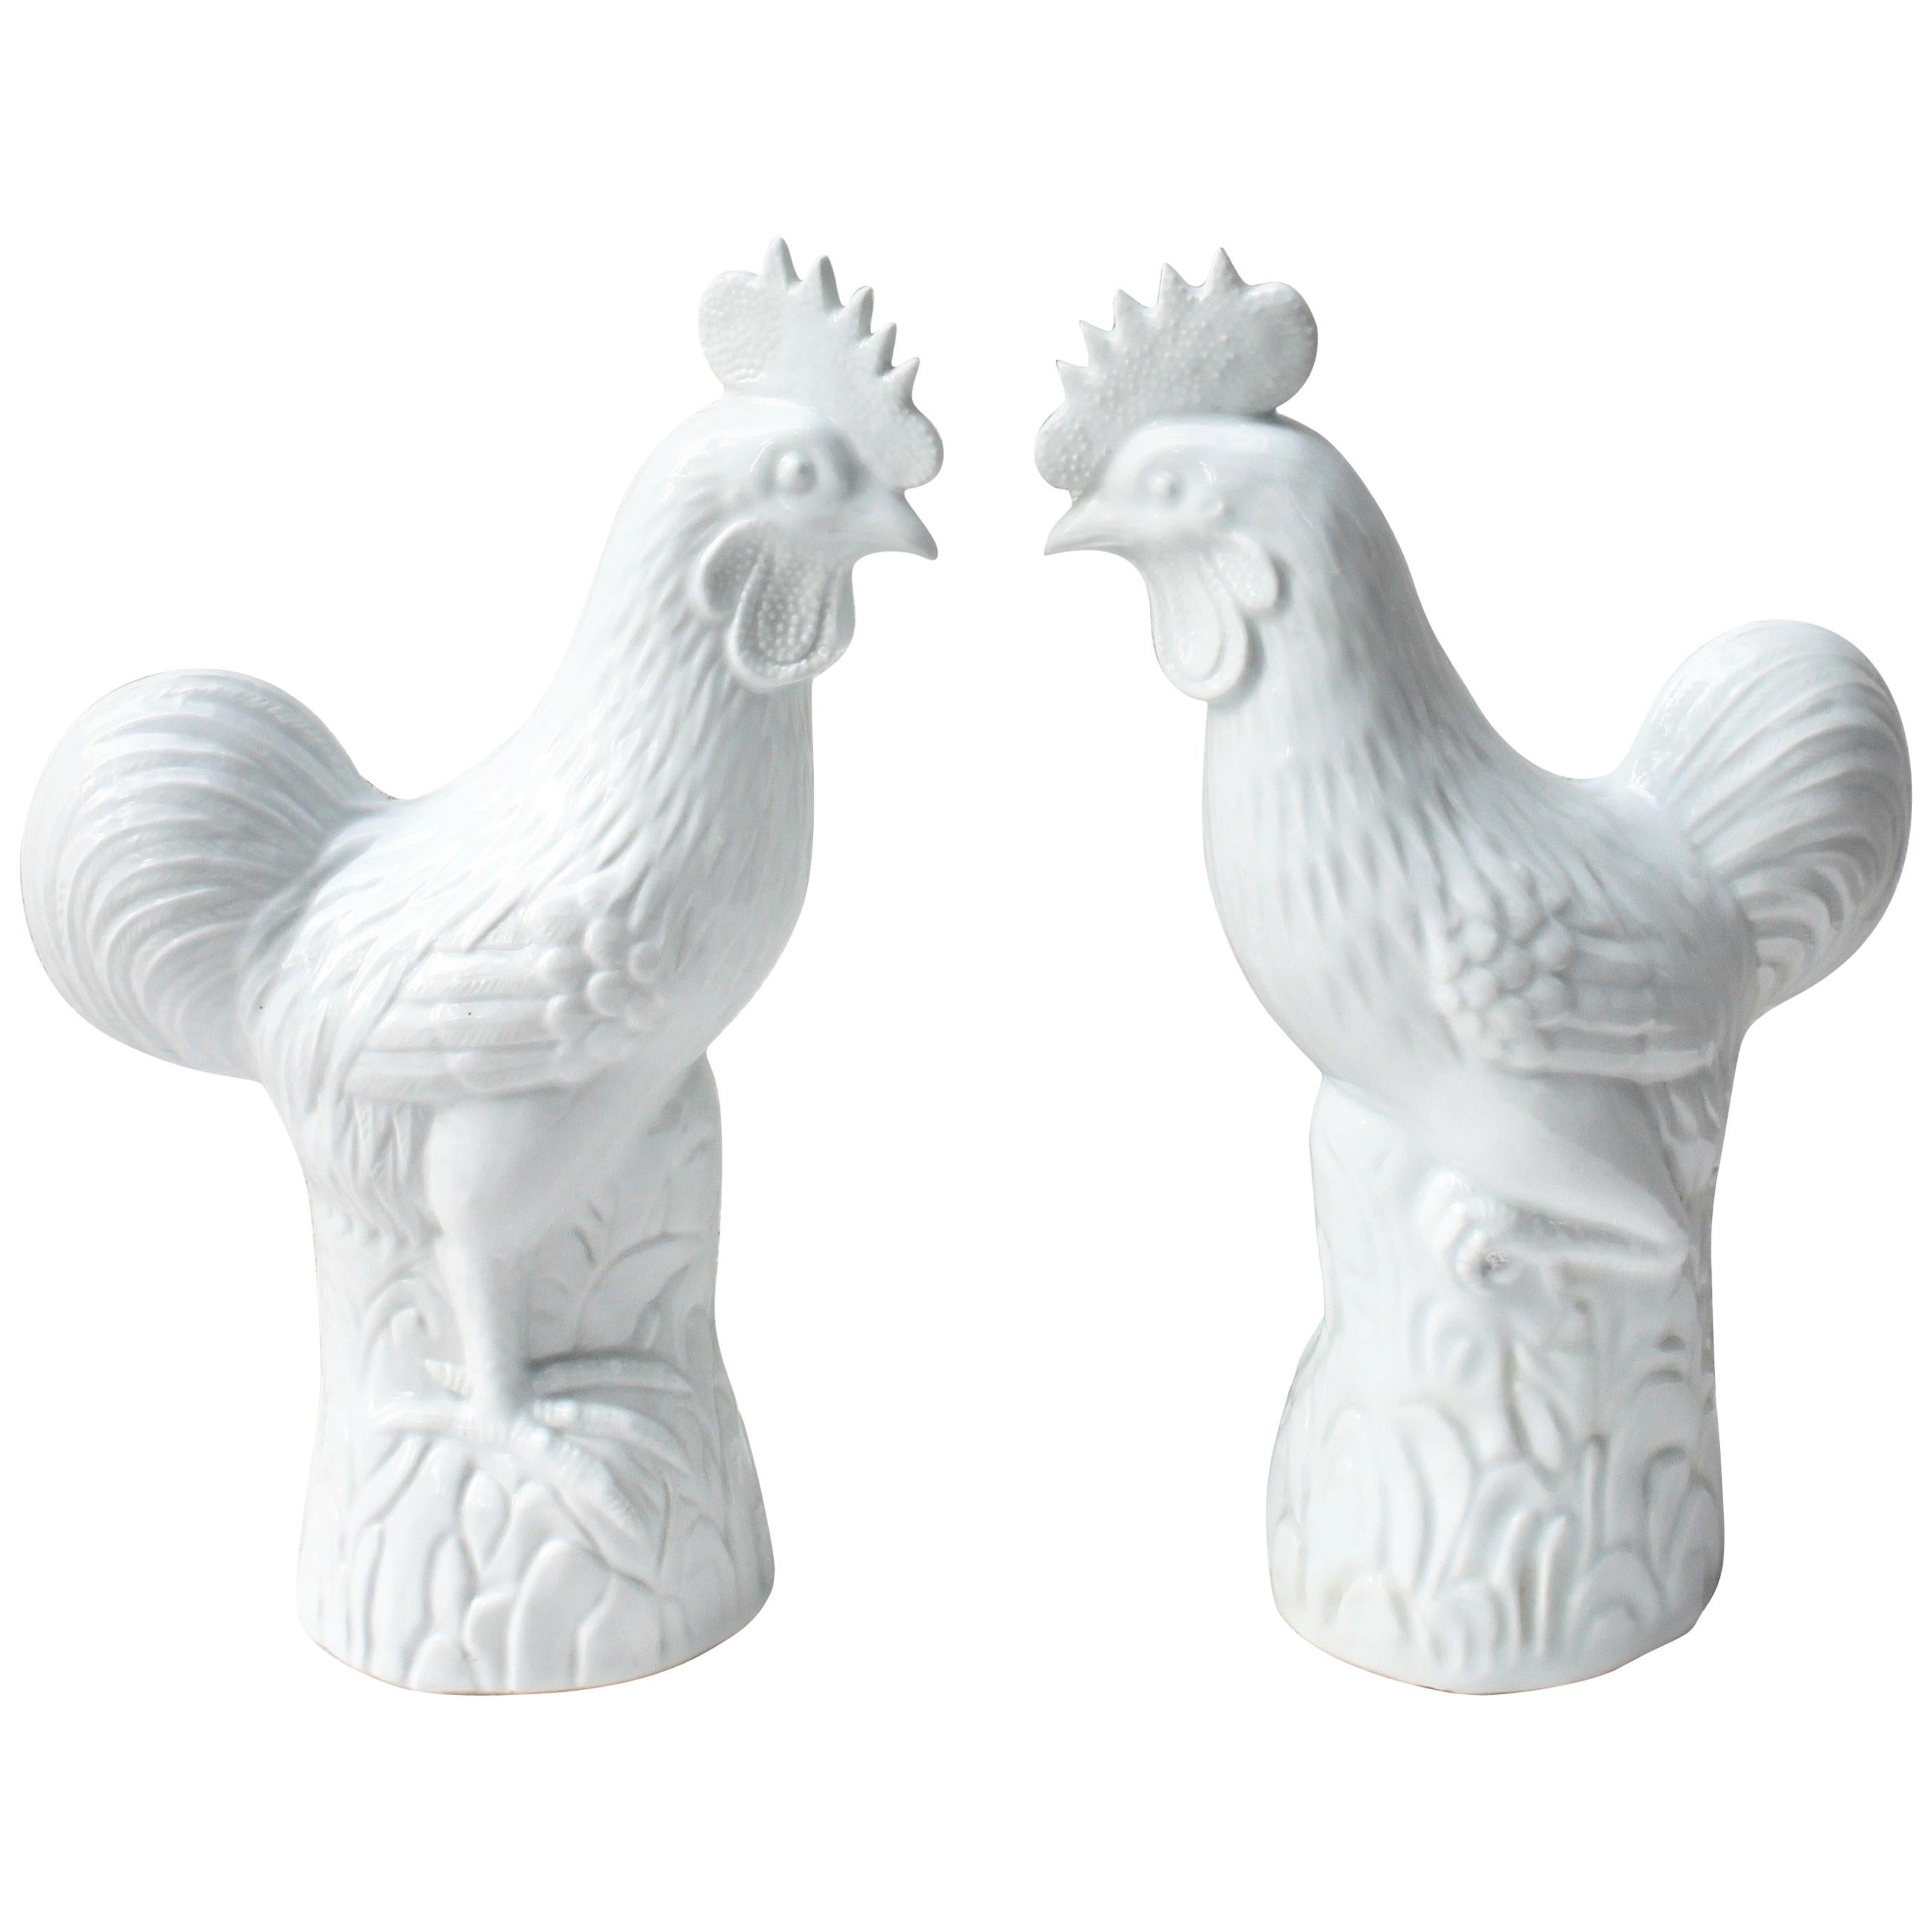 Pair of White Ceramic Roosters For Sale